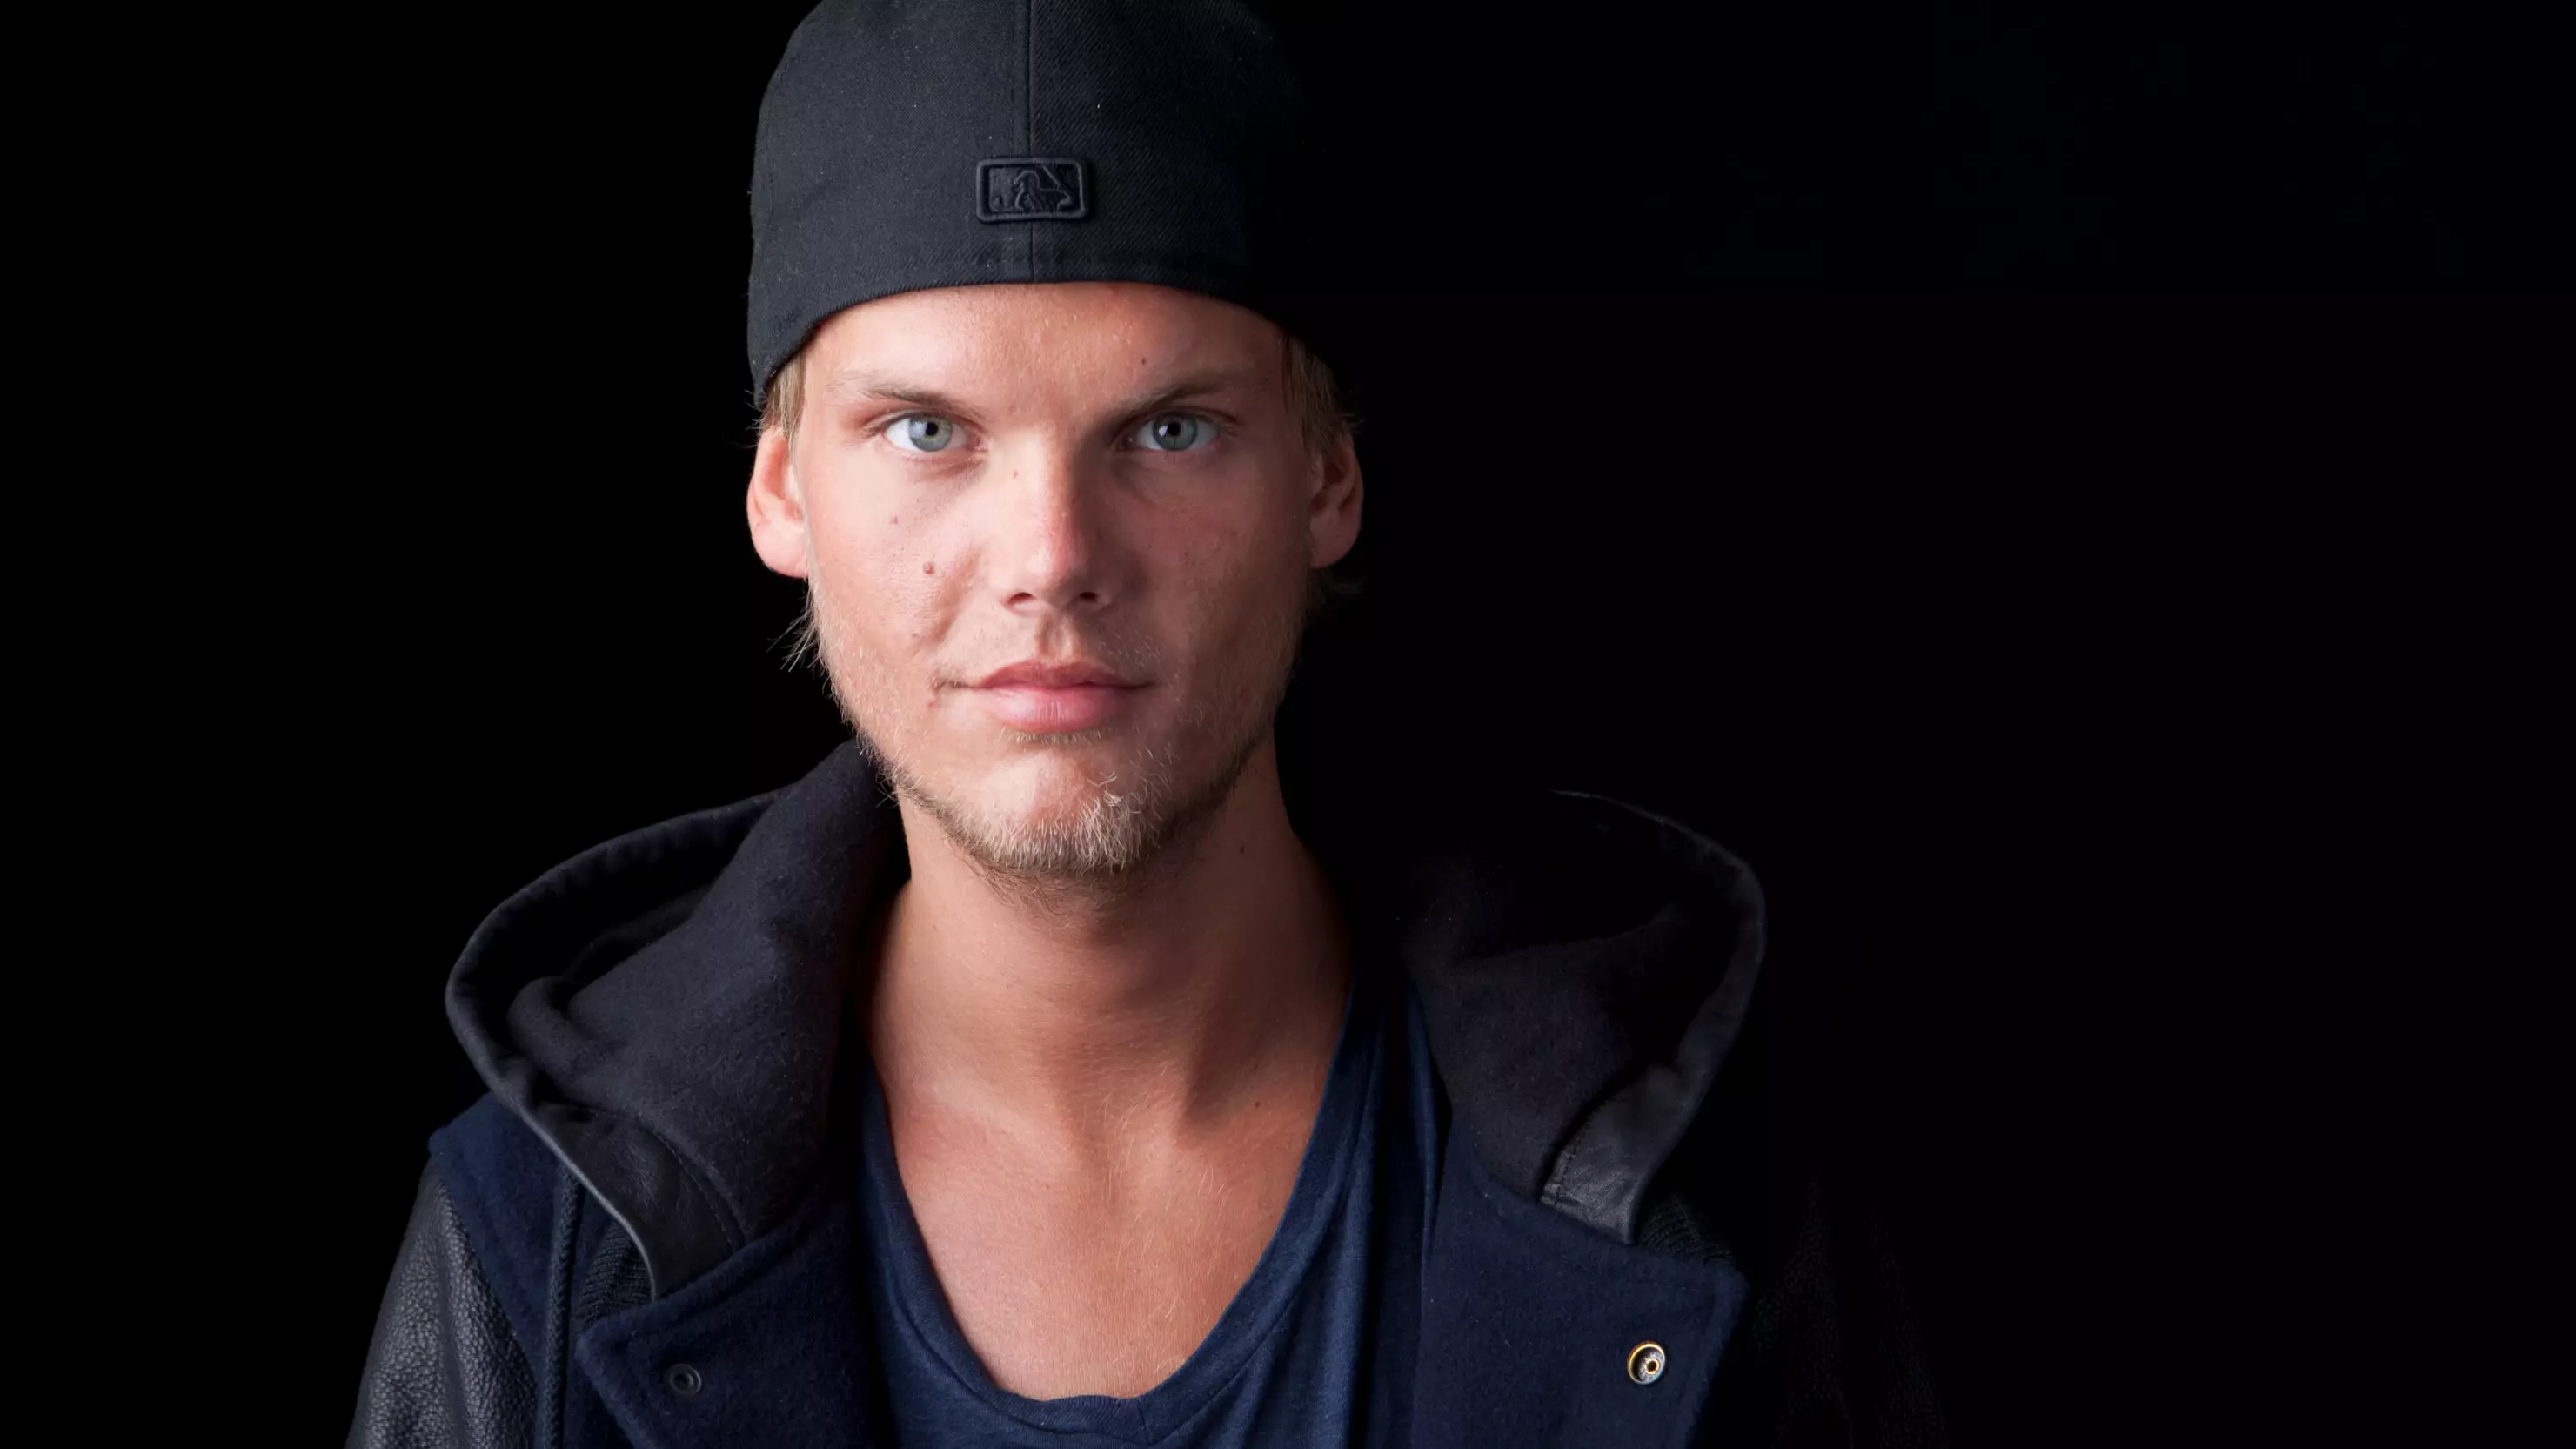 Wake Me Up By Avicii Voted The Best Song Of The Decade